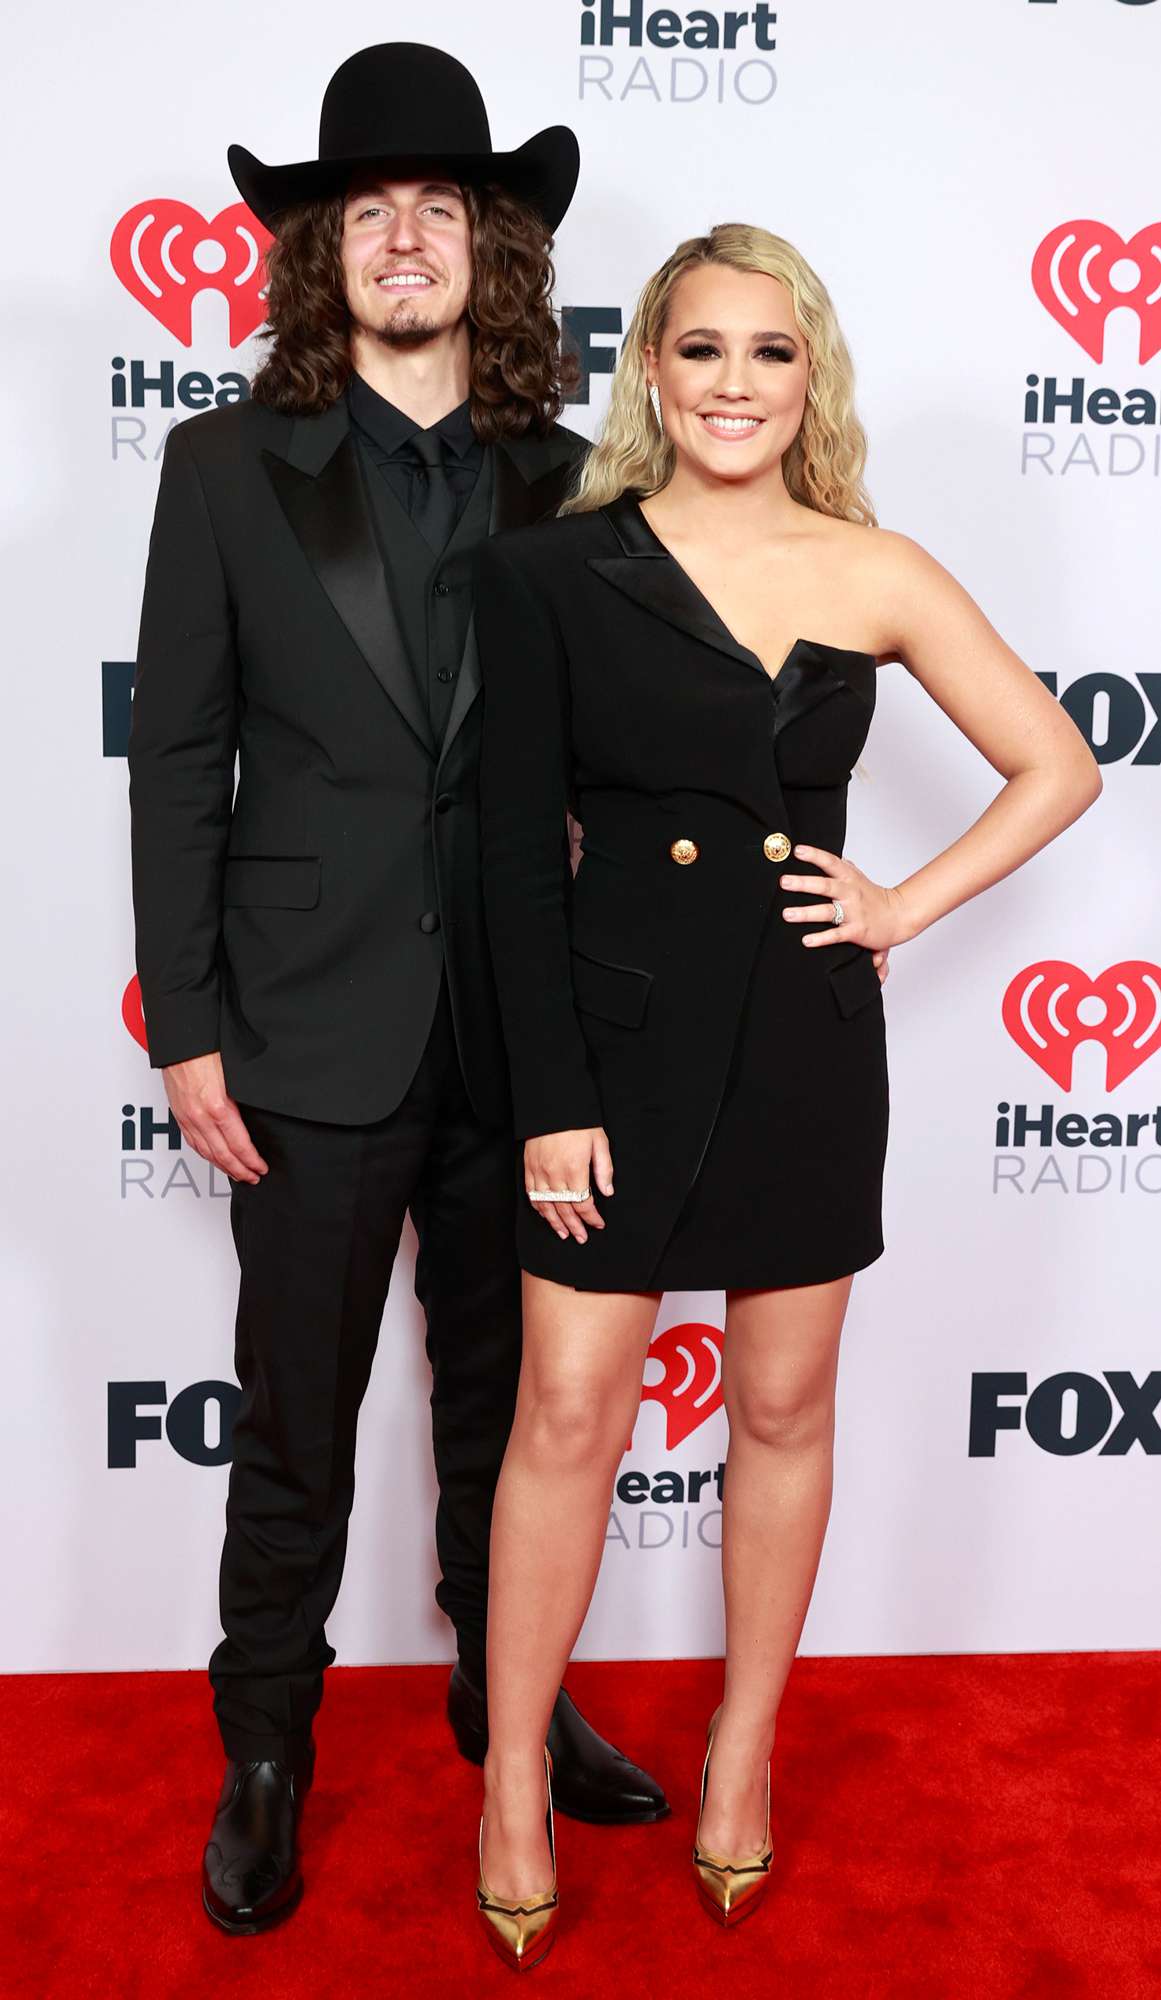 Cade Foehner (L) and Gabby Barrett attend the 2021 iHeartRadio Music Awards at The Dolby Theatre in Los Angeles, California, which was broadcast live on FOX on May 27, 2021